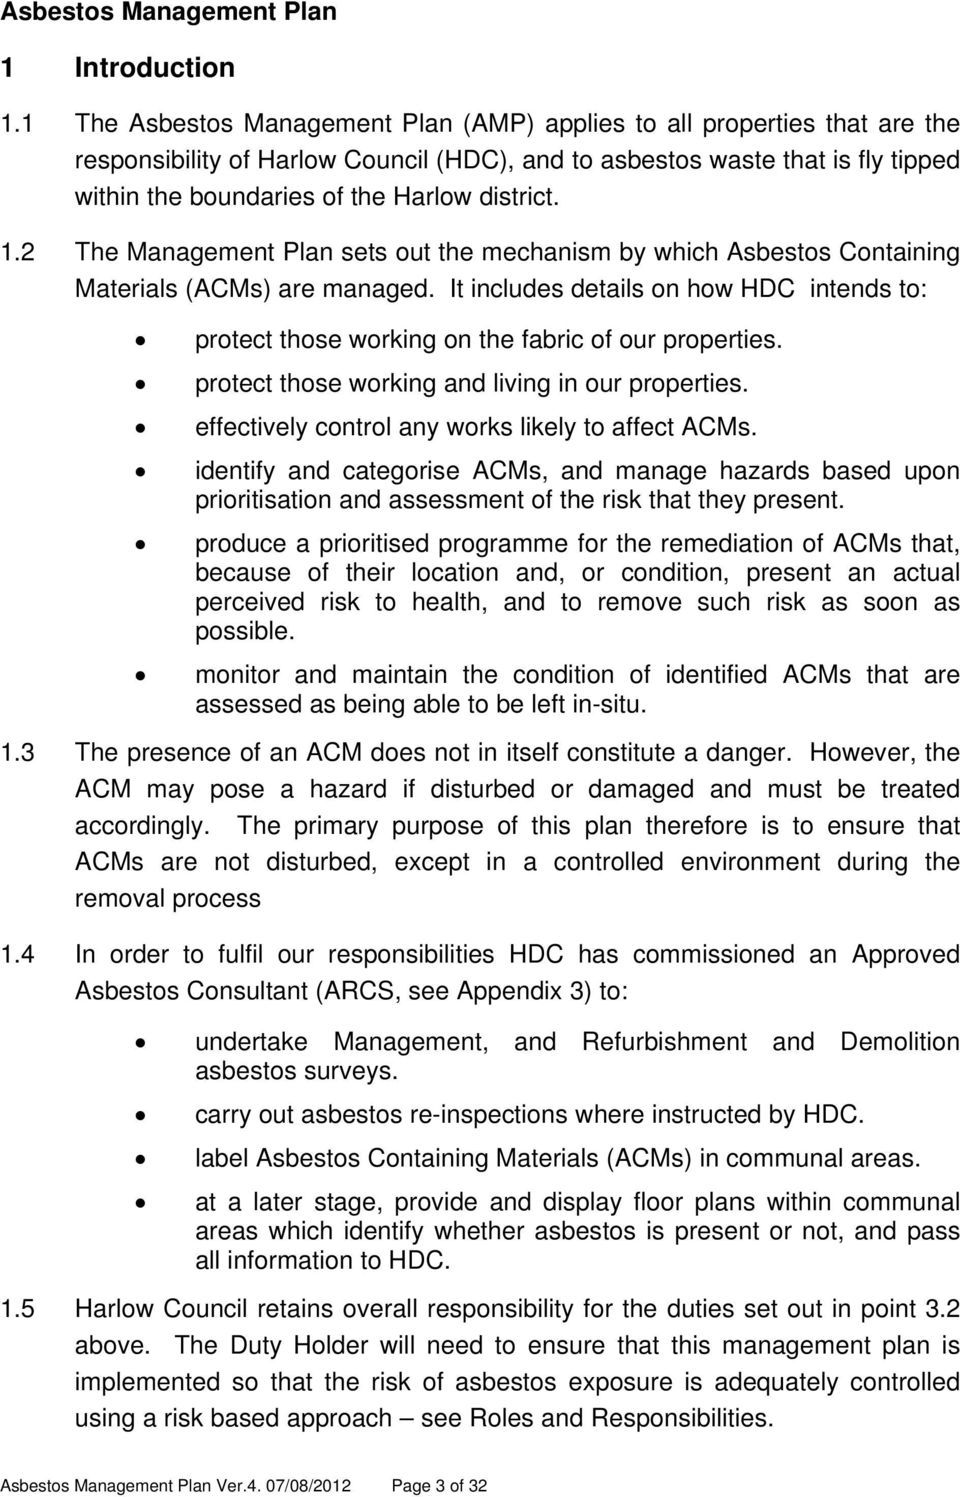 district. 1.2 The Management Plan sets out the mechanism by which Asbestos Containing Materials (ACMs) are managed.